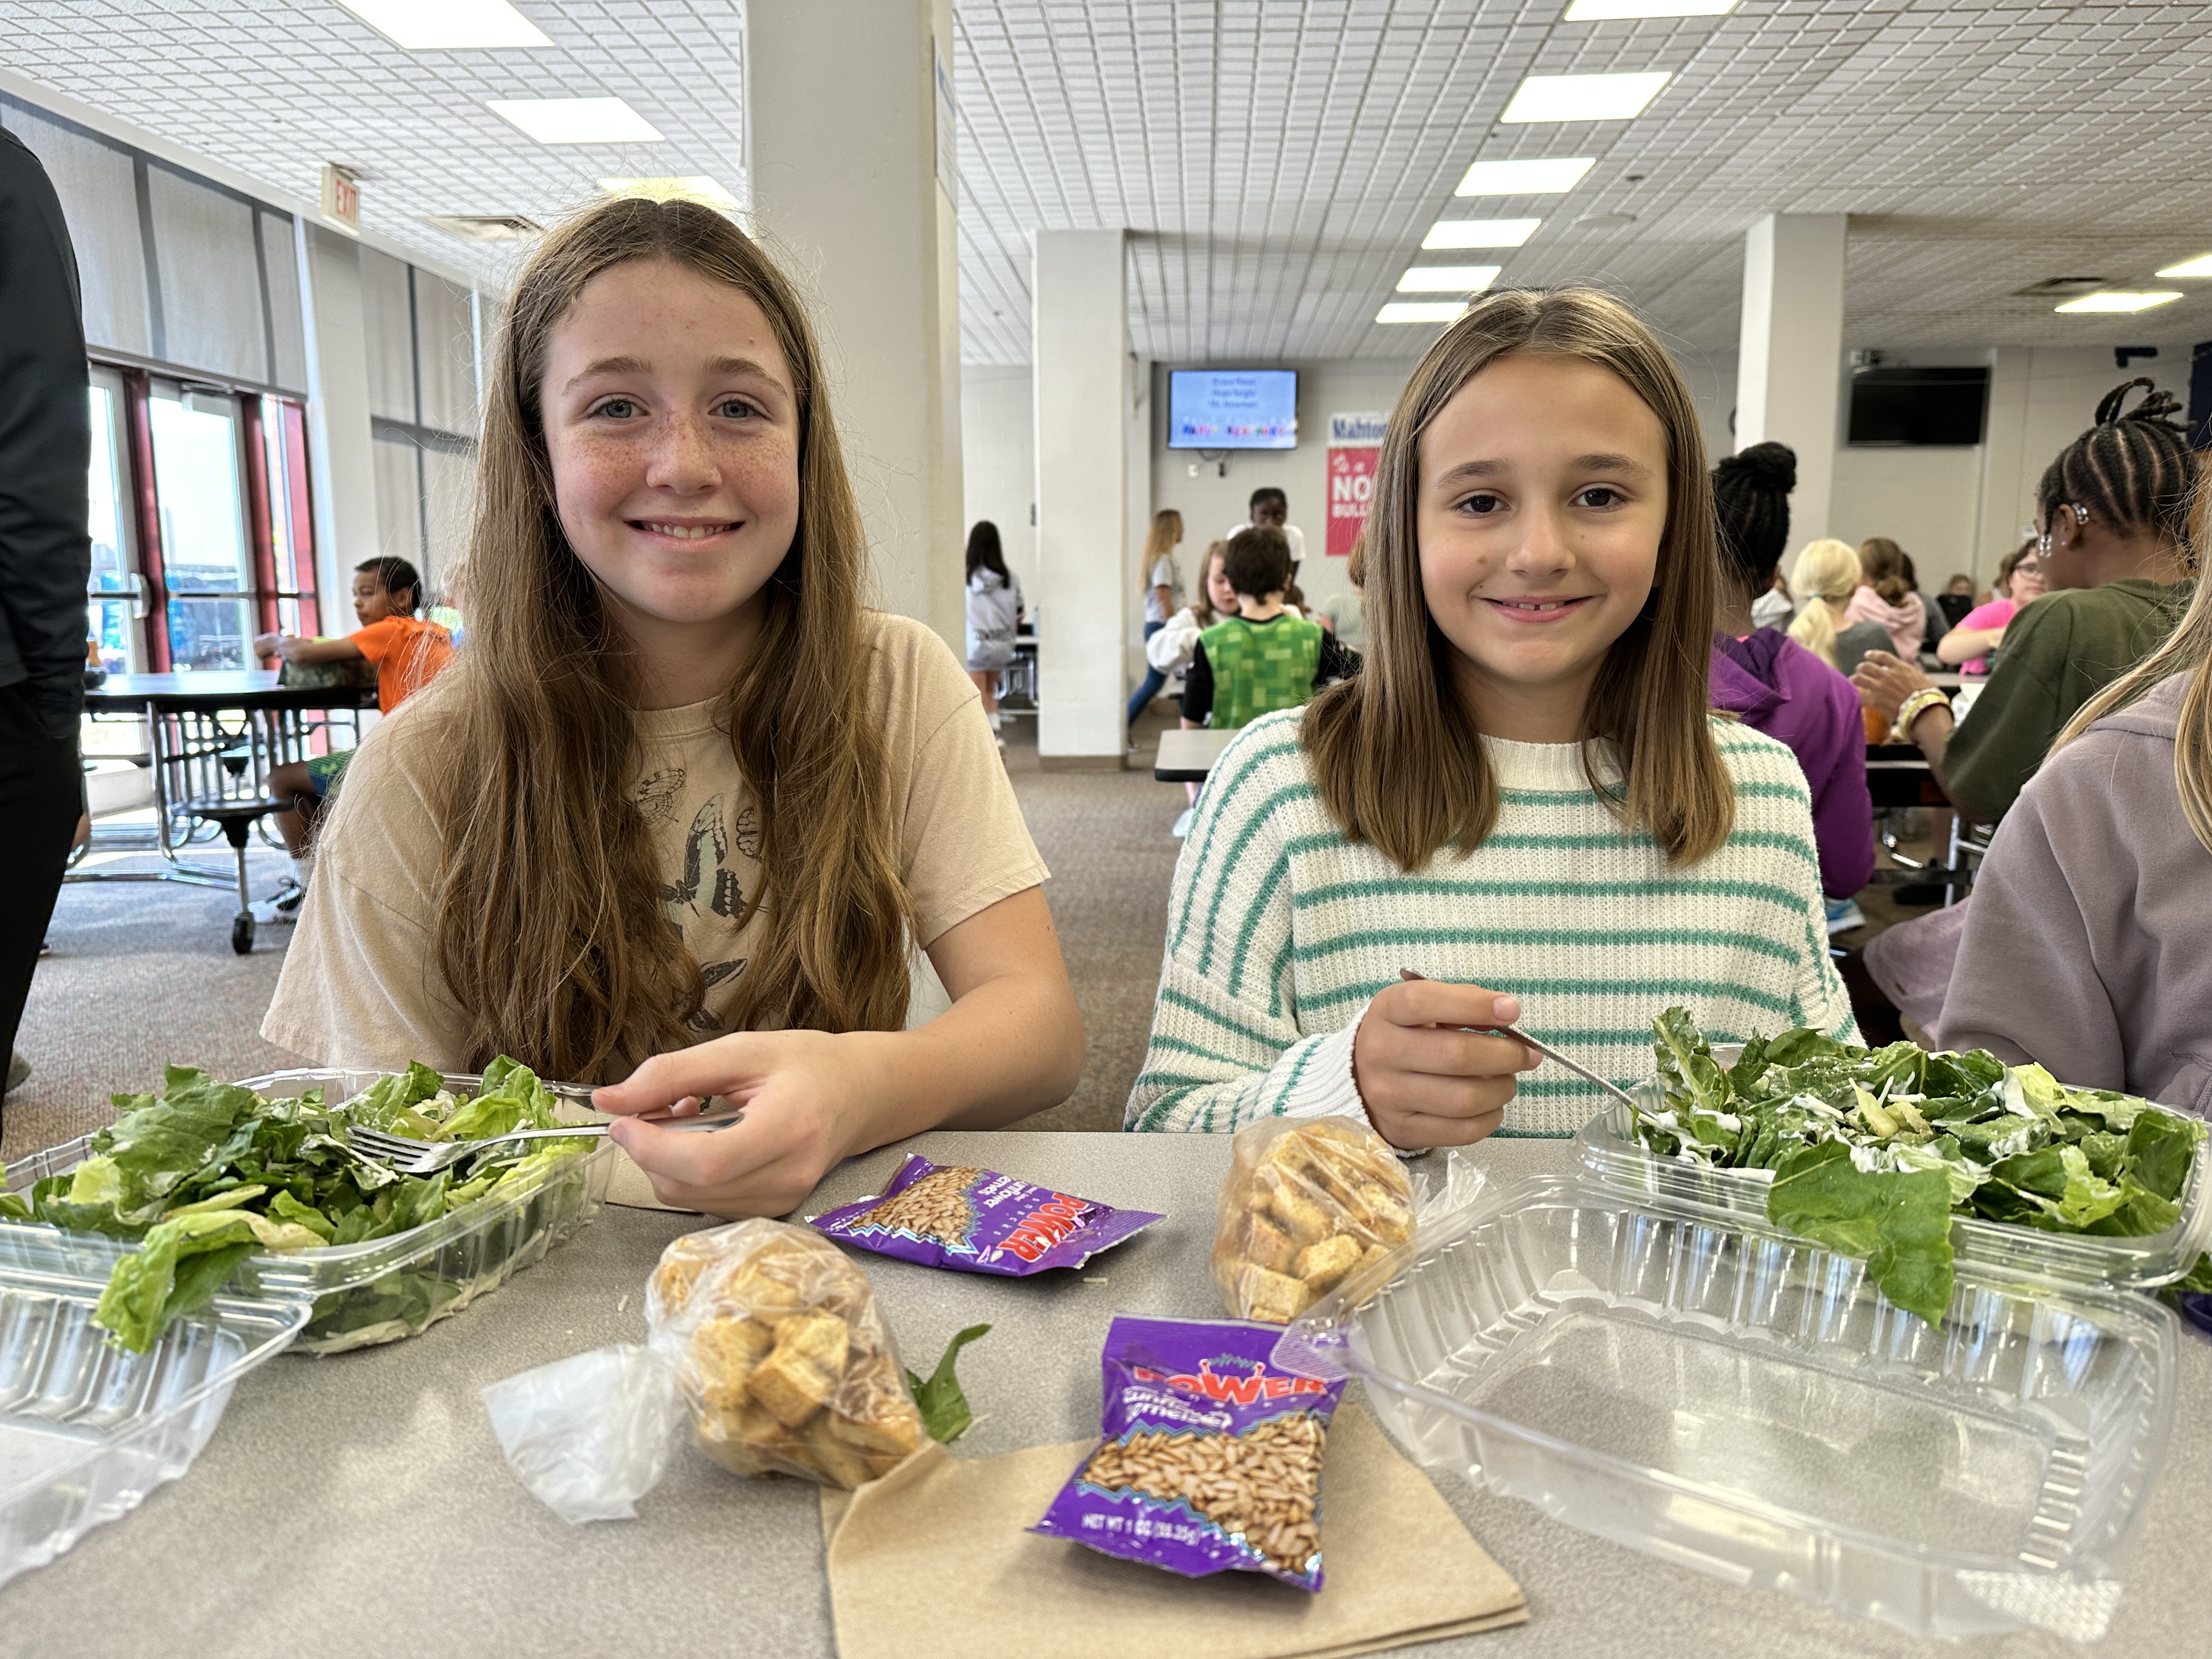 Mahtomedi Middle School students with fresh salads